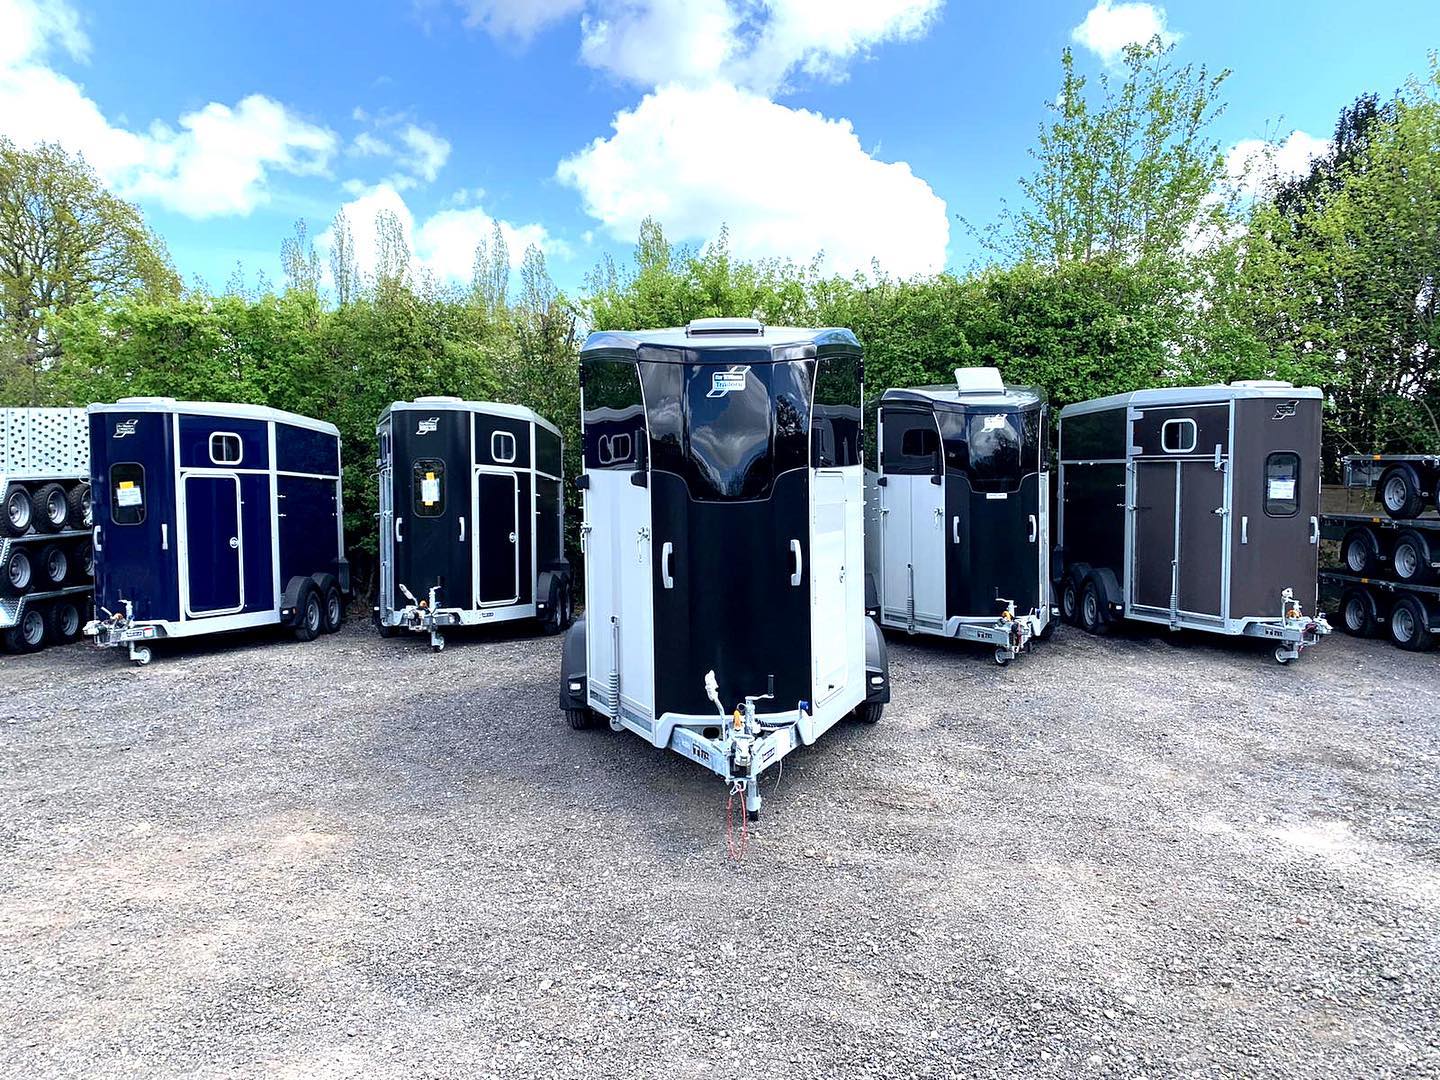 These brand new horse trailers have all just arrived. They’re all sold and are all getting ready for customer collections. 

#iforwilliams #iforwilliamshorsetrailer #HB506 #HB511 #HBX506 #HBX511 #iforwilliamstrailers